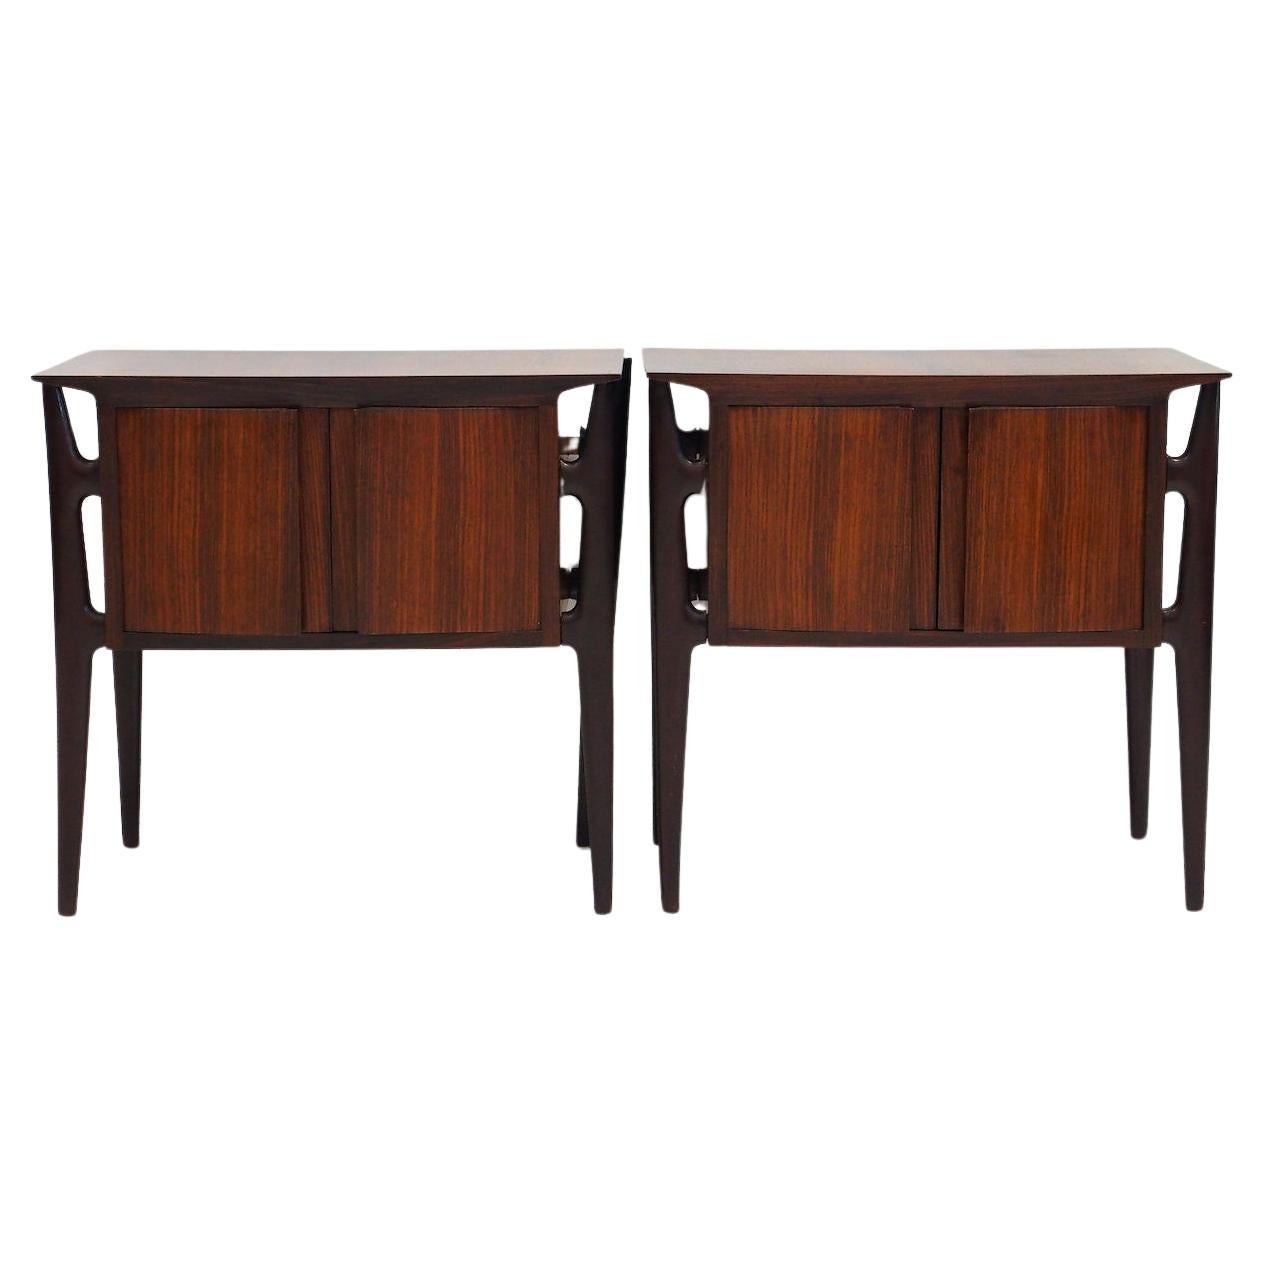 Pair of Wooden Mid-Century Italian Bedside Tables